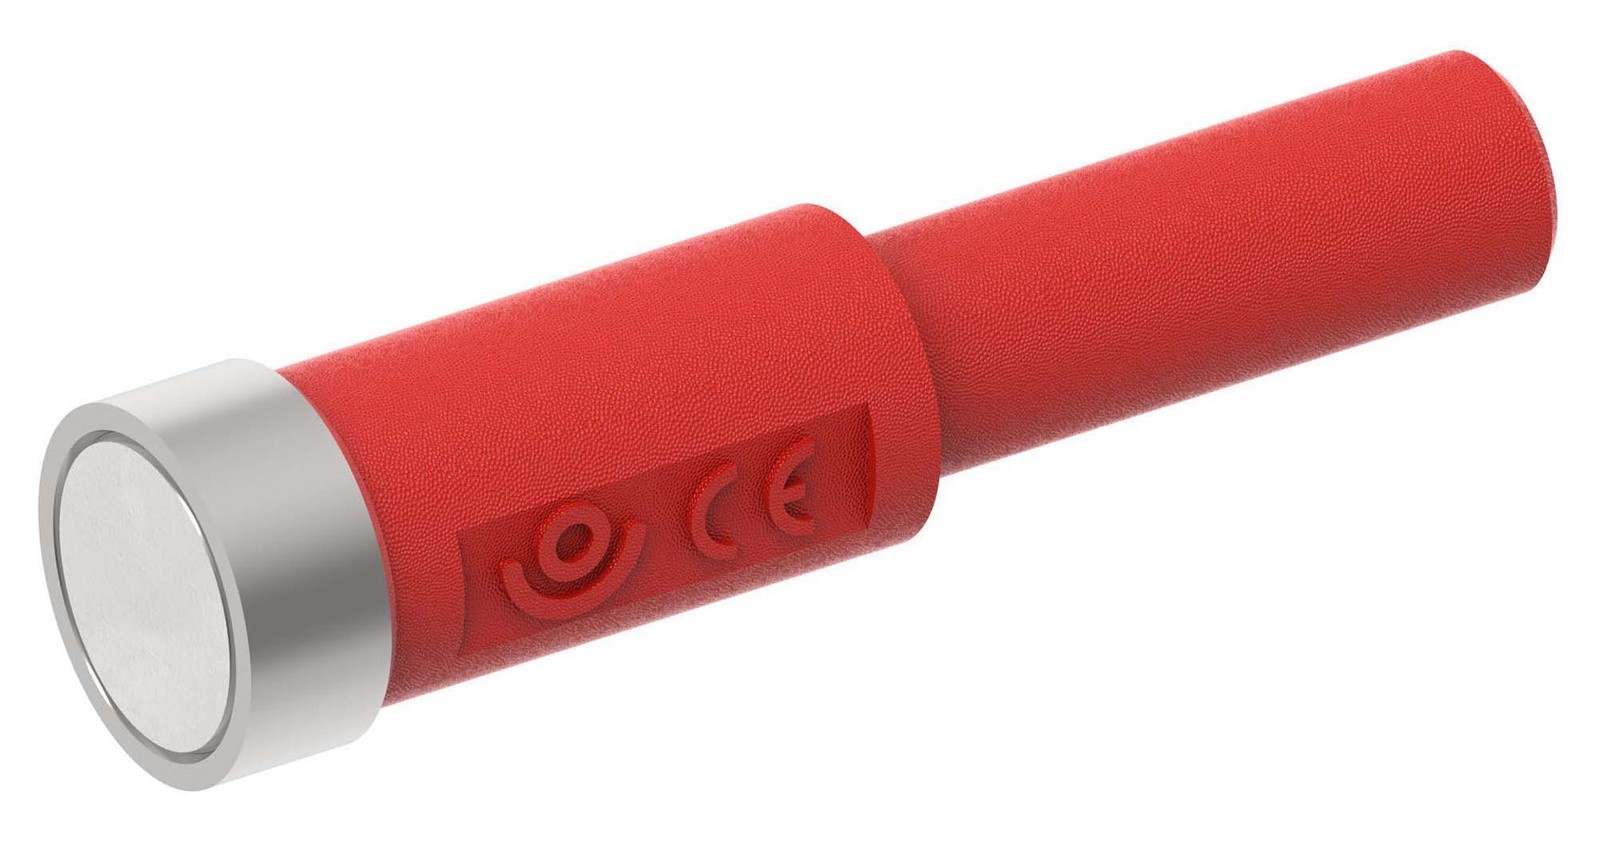 Cal Test Electronics Ct3880-2 10mm Magnetic Connector, 4mm Jack, 4A, Red